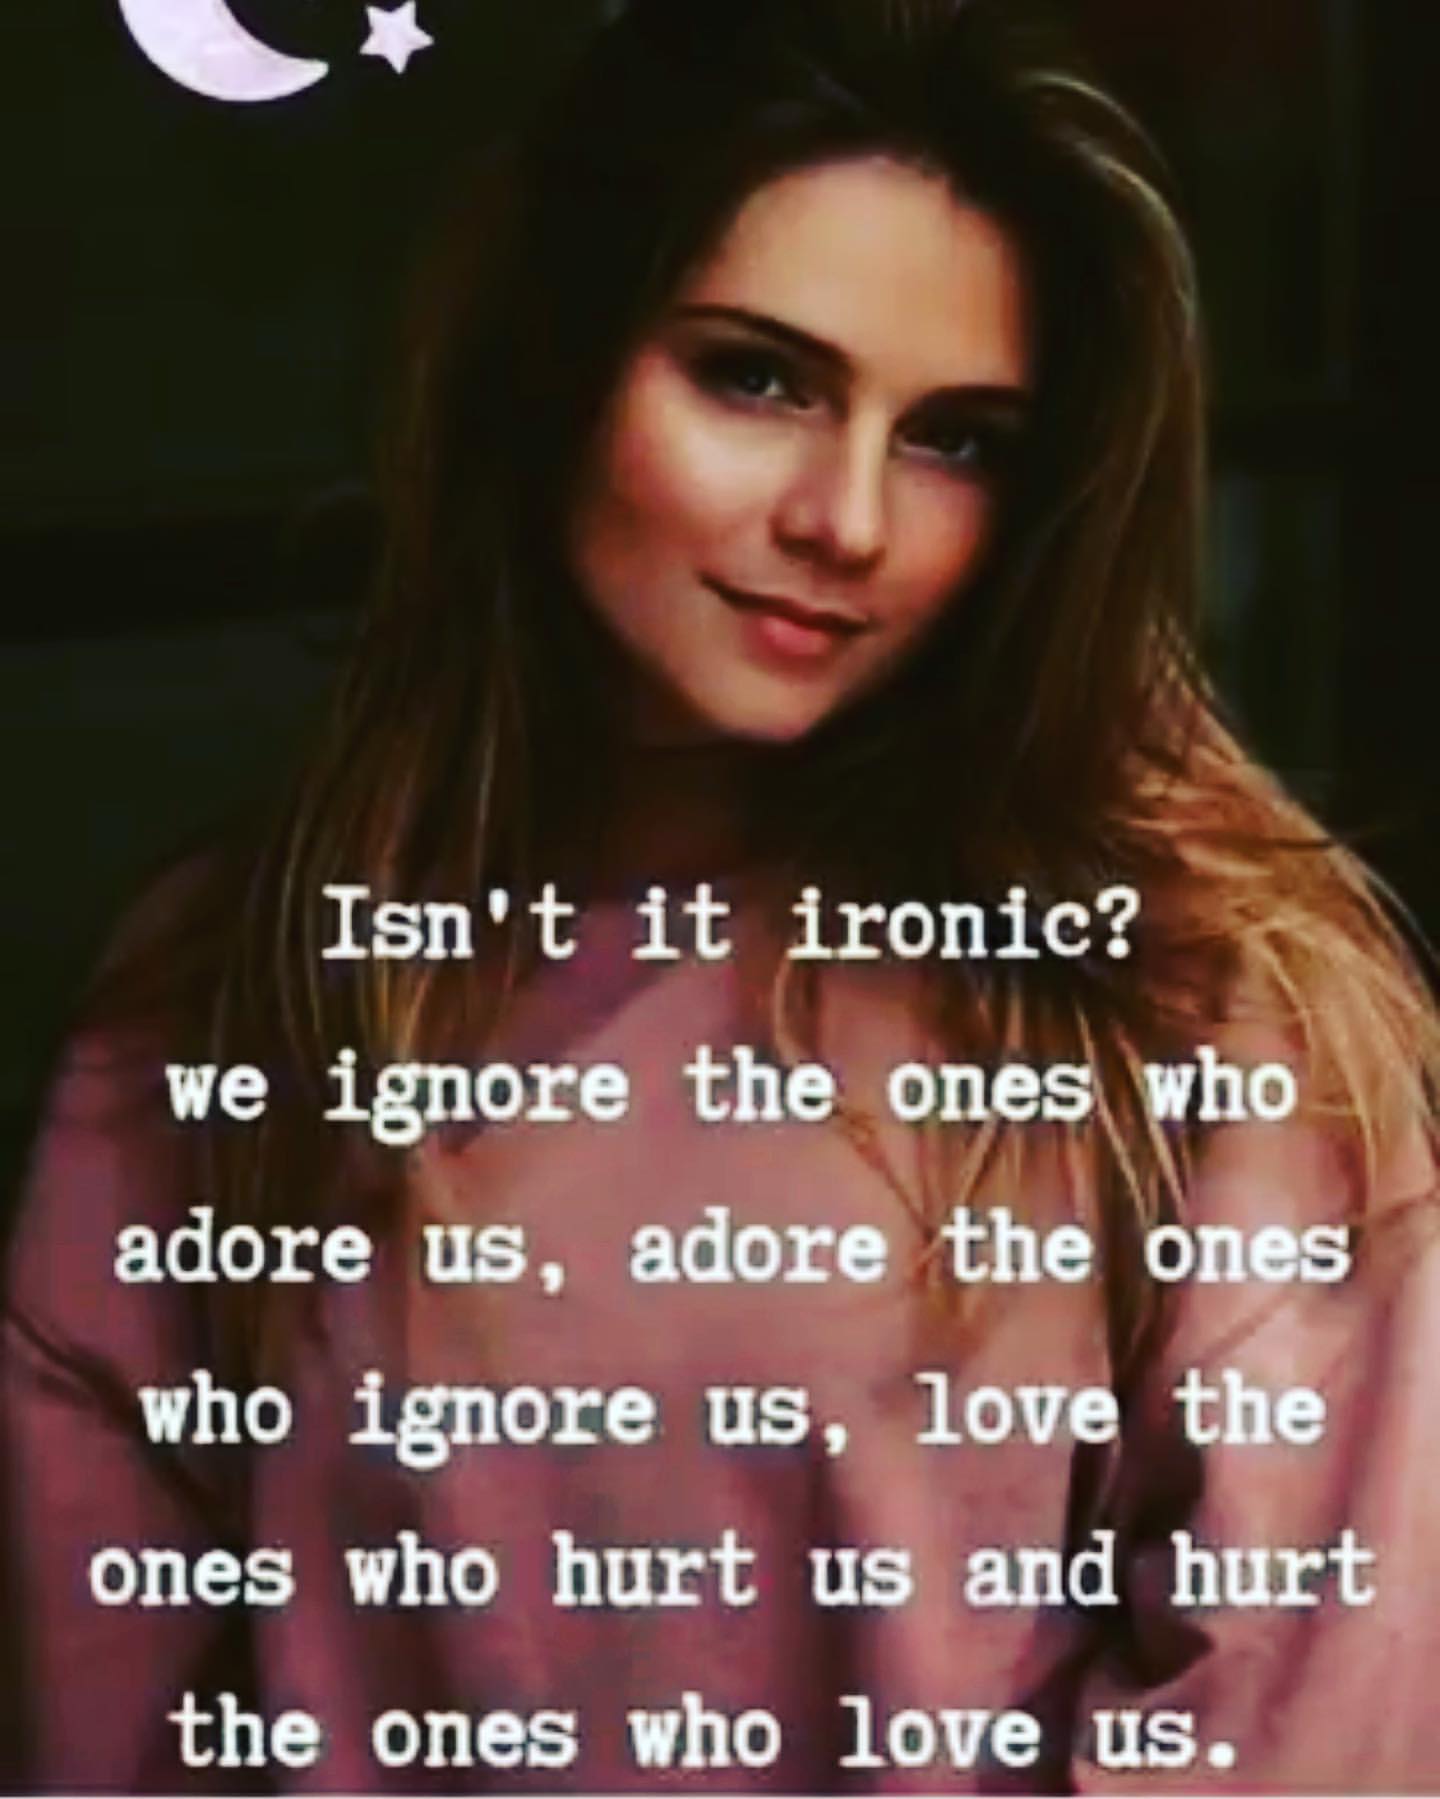 Isn't it ironic? We ignore the ones who adore us, adore the ones who ignore us, love the ones who hurt us and hurt the ones who love us.